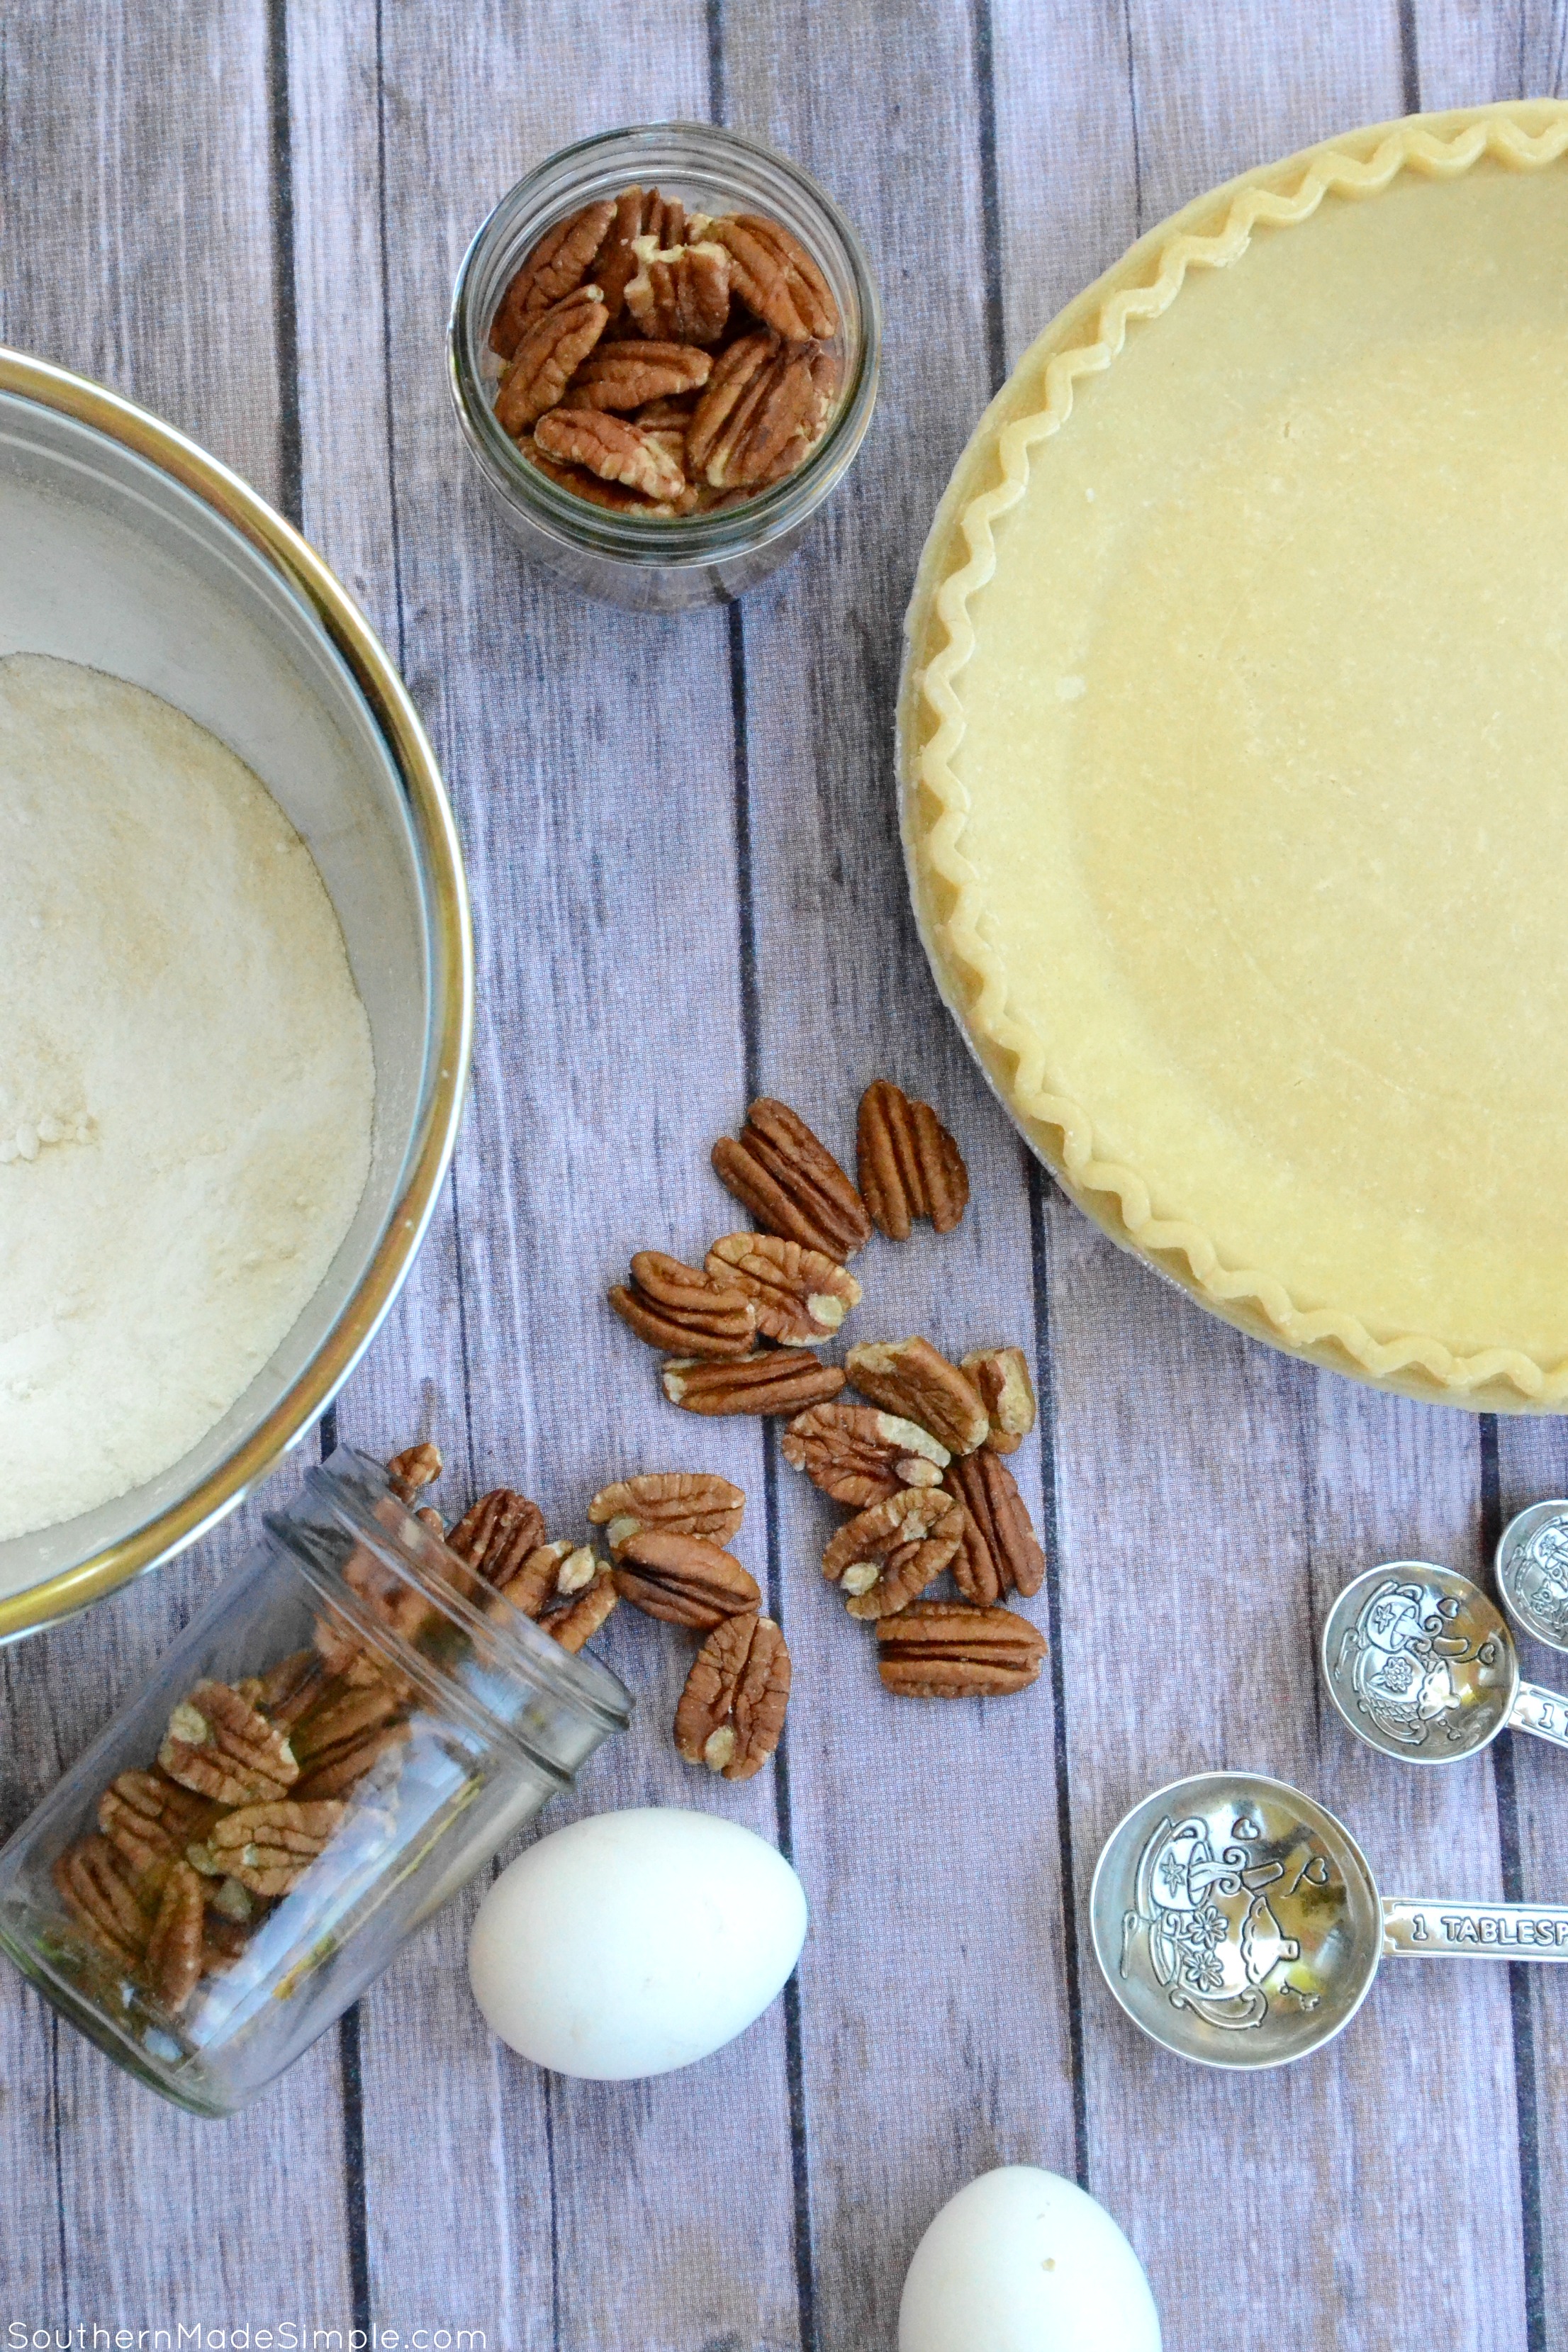 Celebrate the arrival of Fall with this fun twist on a simple southern dish! These mini pecan pie trifles are easy to make and will be the talk of the party! #SKSHarvest #SeasonalSolutions #ad